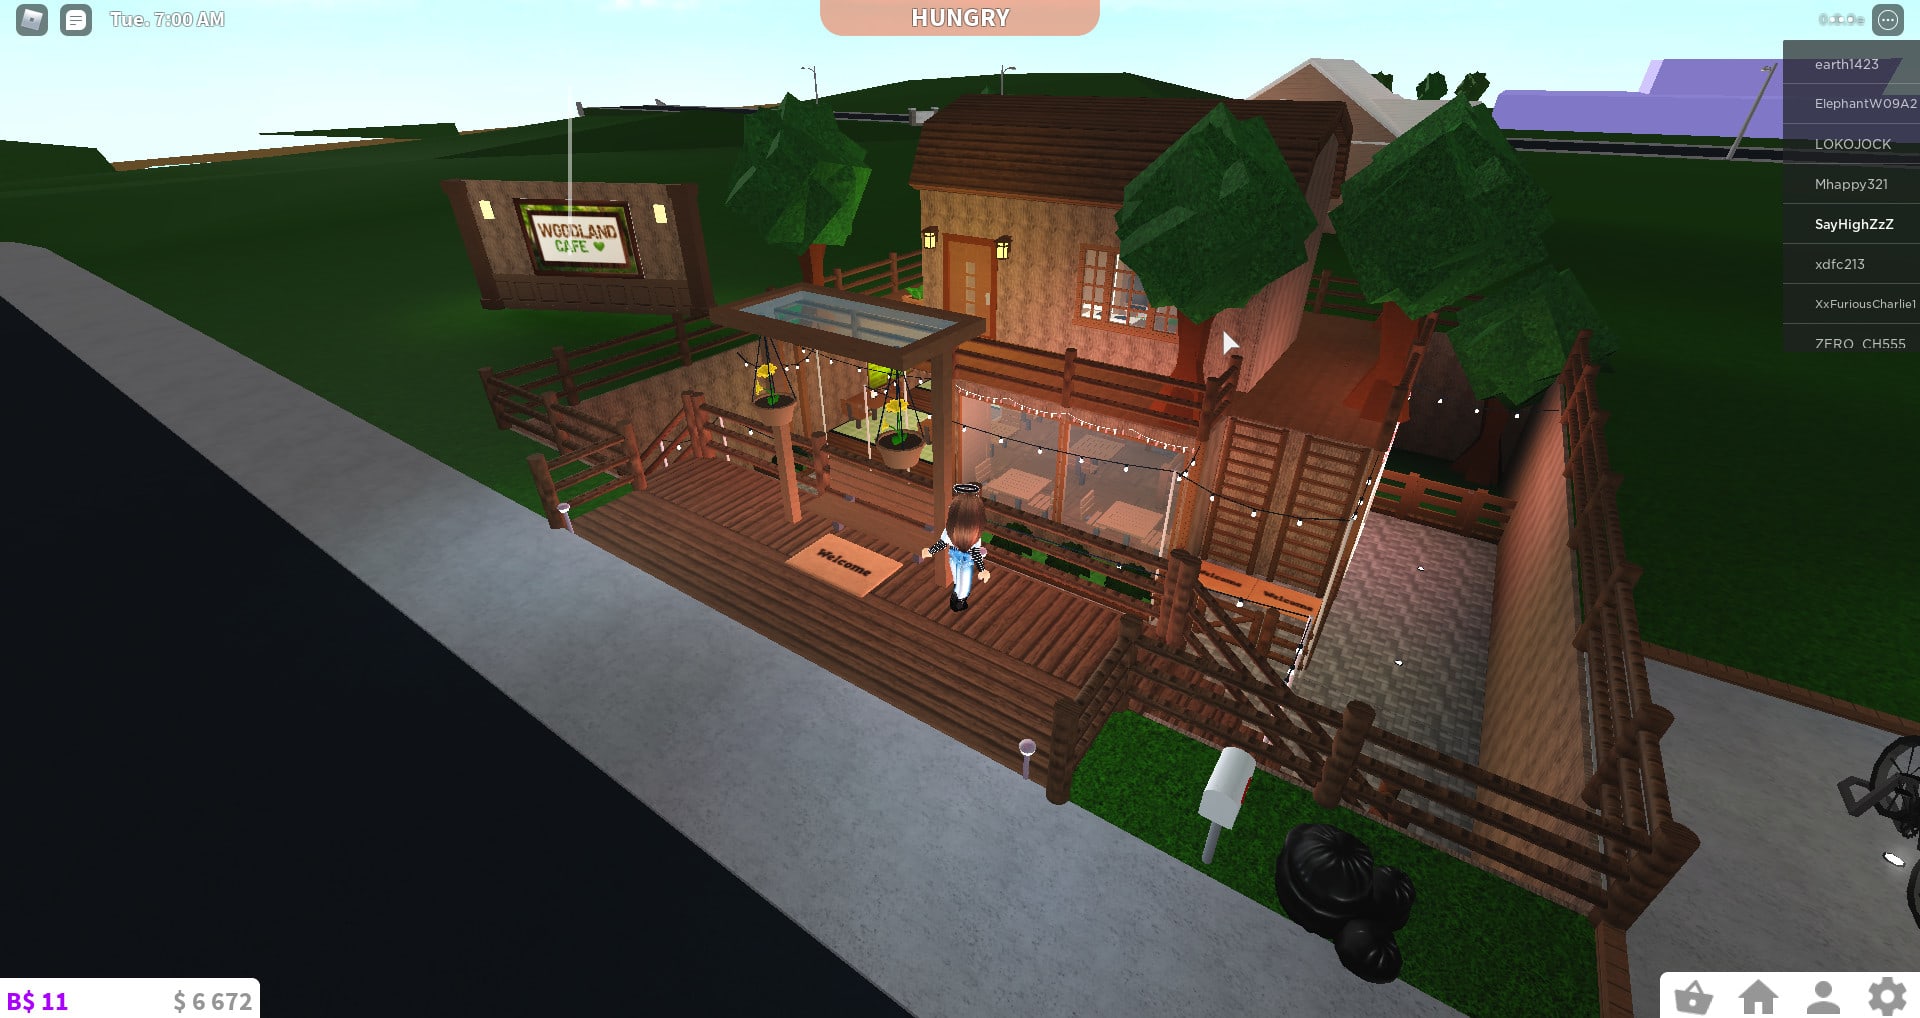 Build You A Nice Cafe Or Restaurant On Roblox Bloxburg By Sayhighzz Fiverr - how to make a cafe on roblox